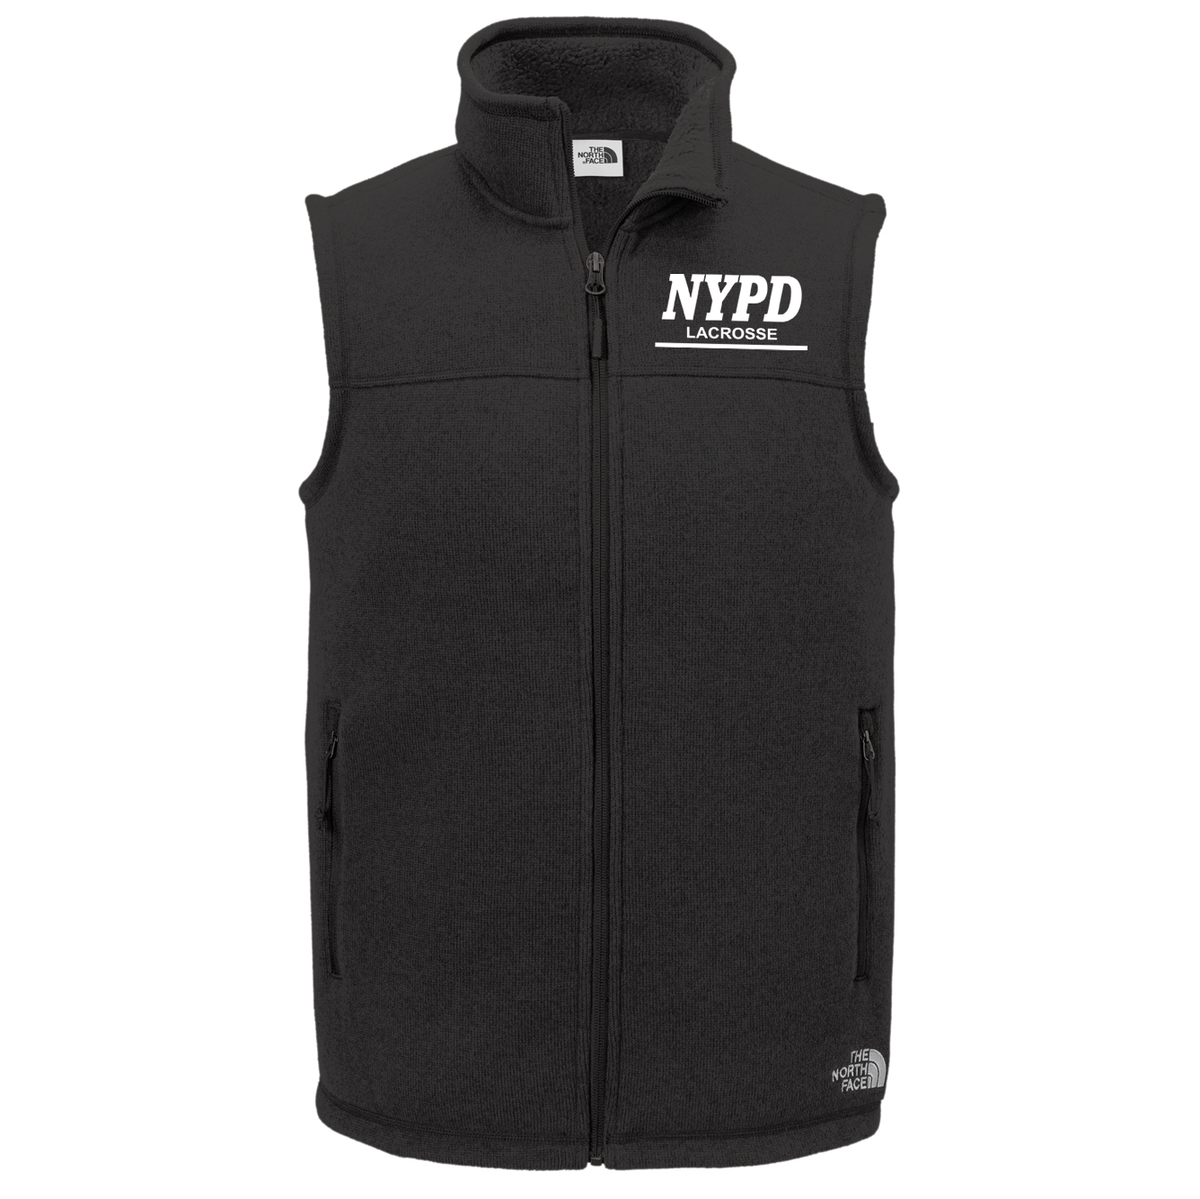 NYPD Lacrosse North The North Face ® Sweater Fleece Vest